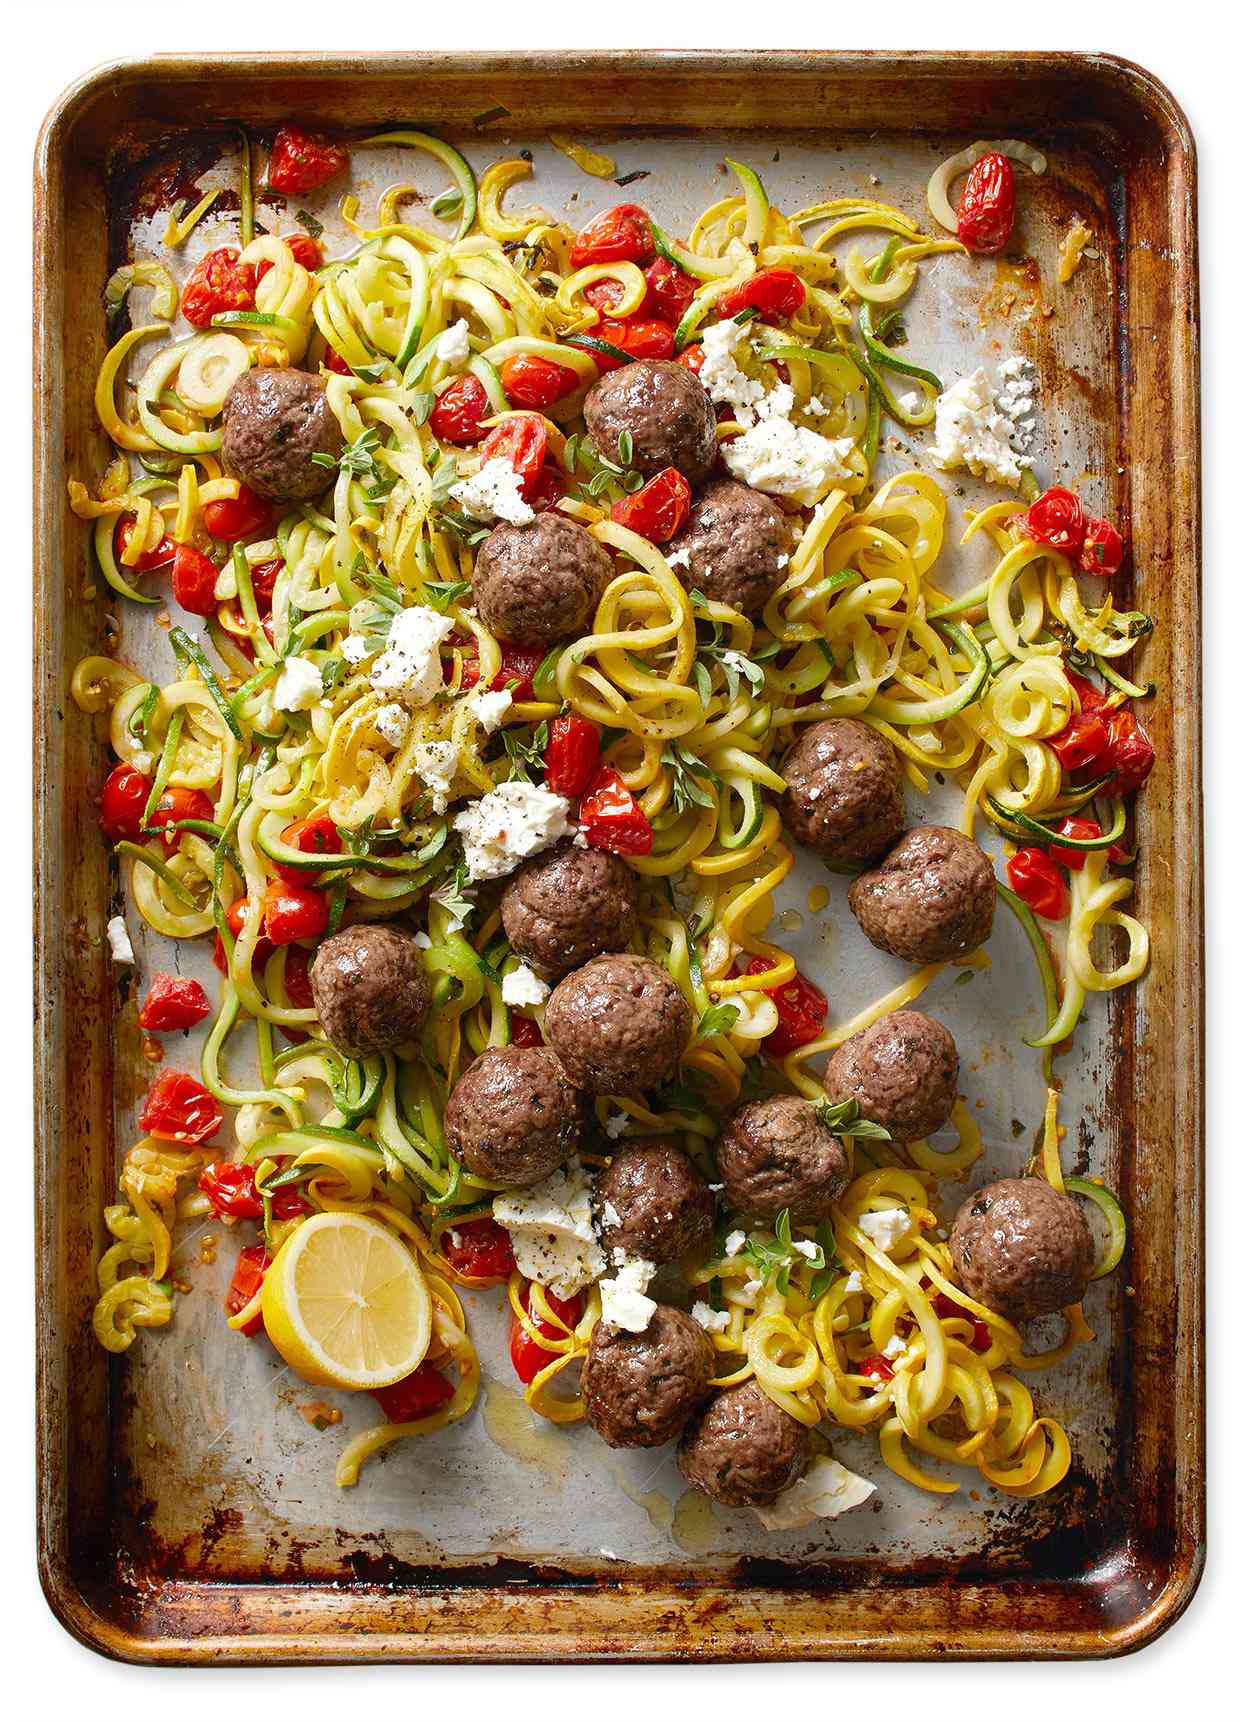 Greek Meatballs with Summer Squash “Noodles” and Tomatoes